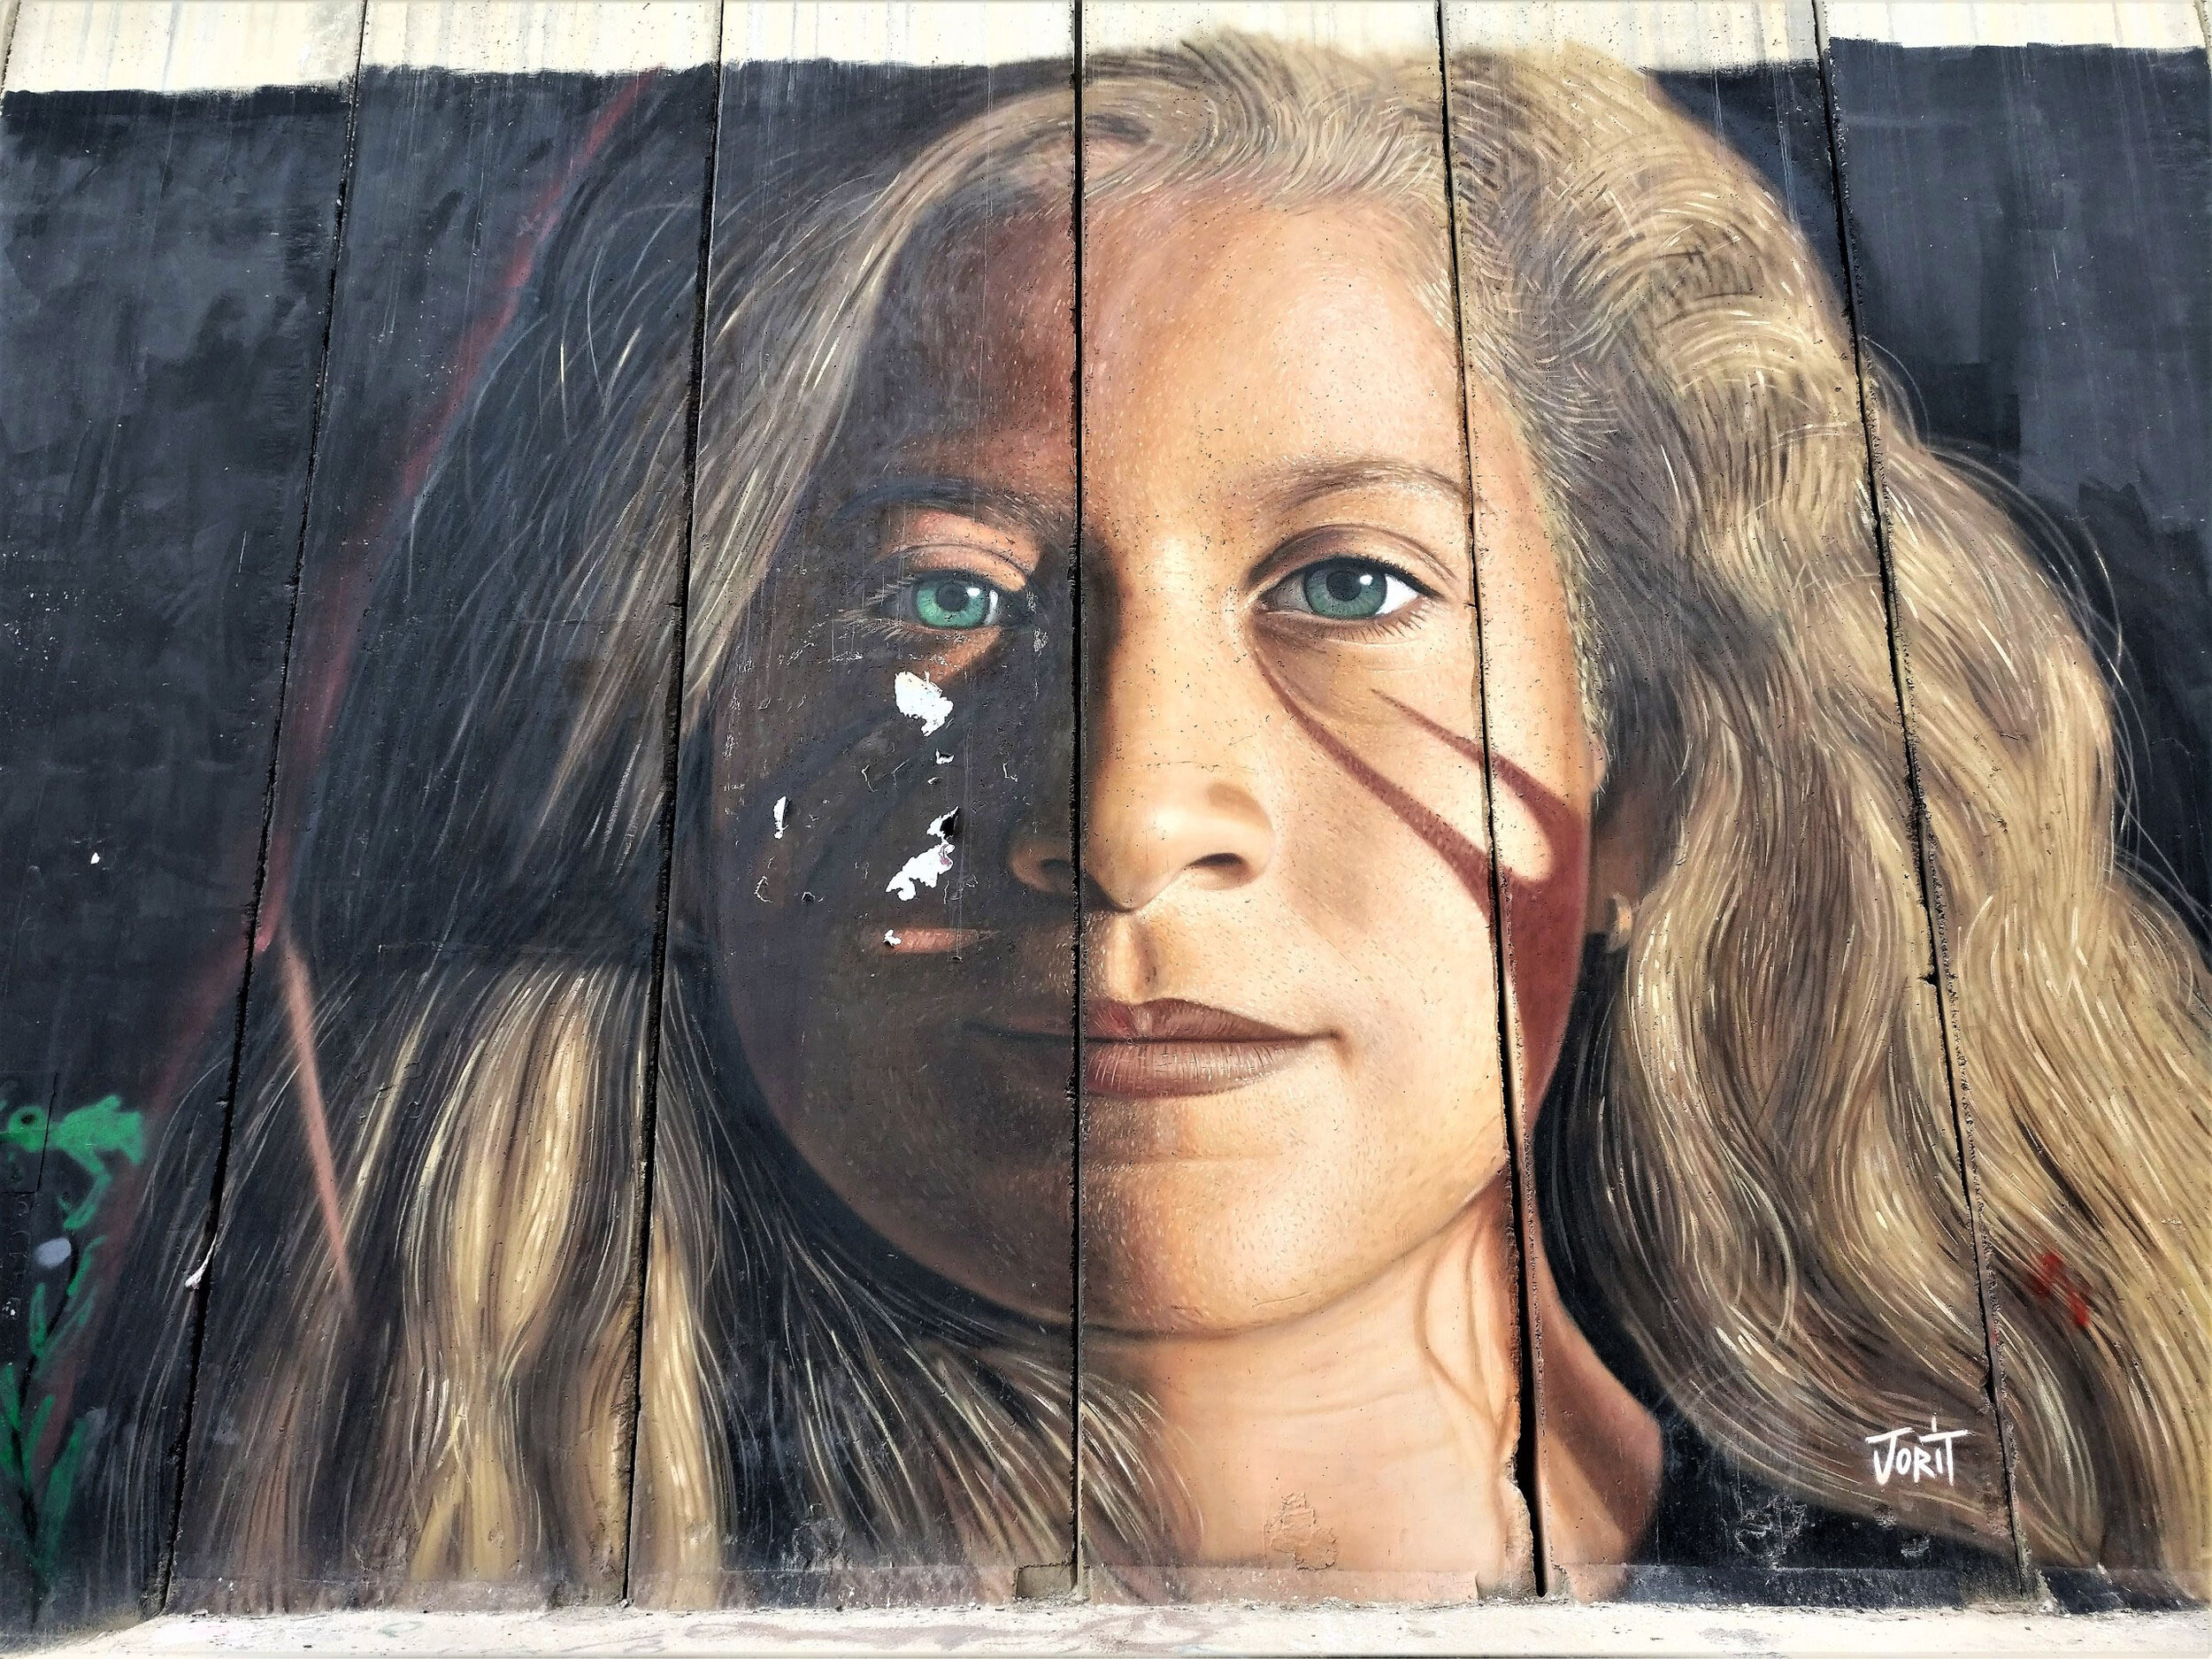 The Wall with a mural of activist   Ahed Tamimi  , who in 2017 was jailed for slapping an Israeli soldier. Italian street artist  Jorit Agoch  was later arrested for deifying Tamimi.